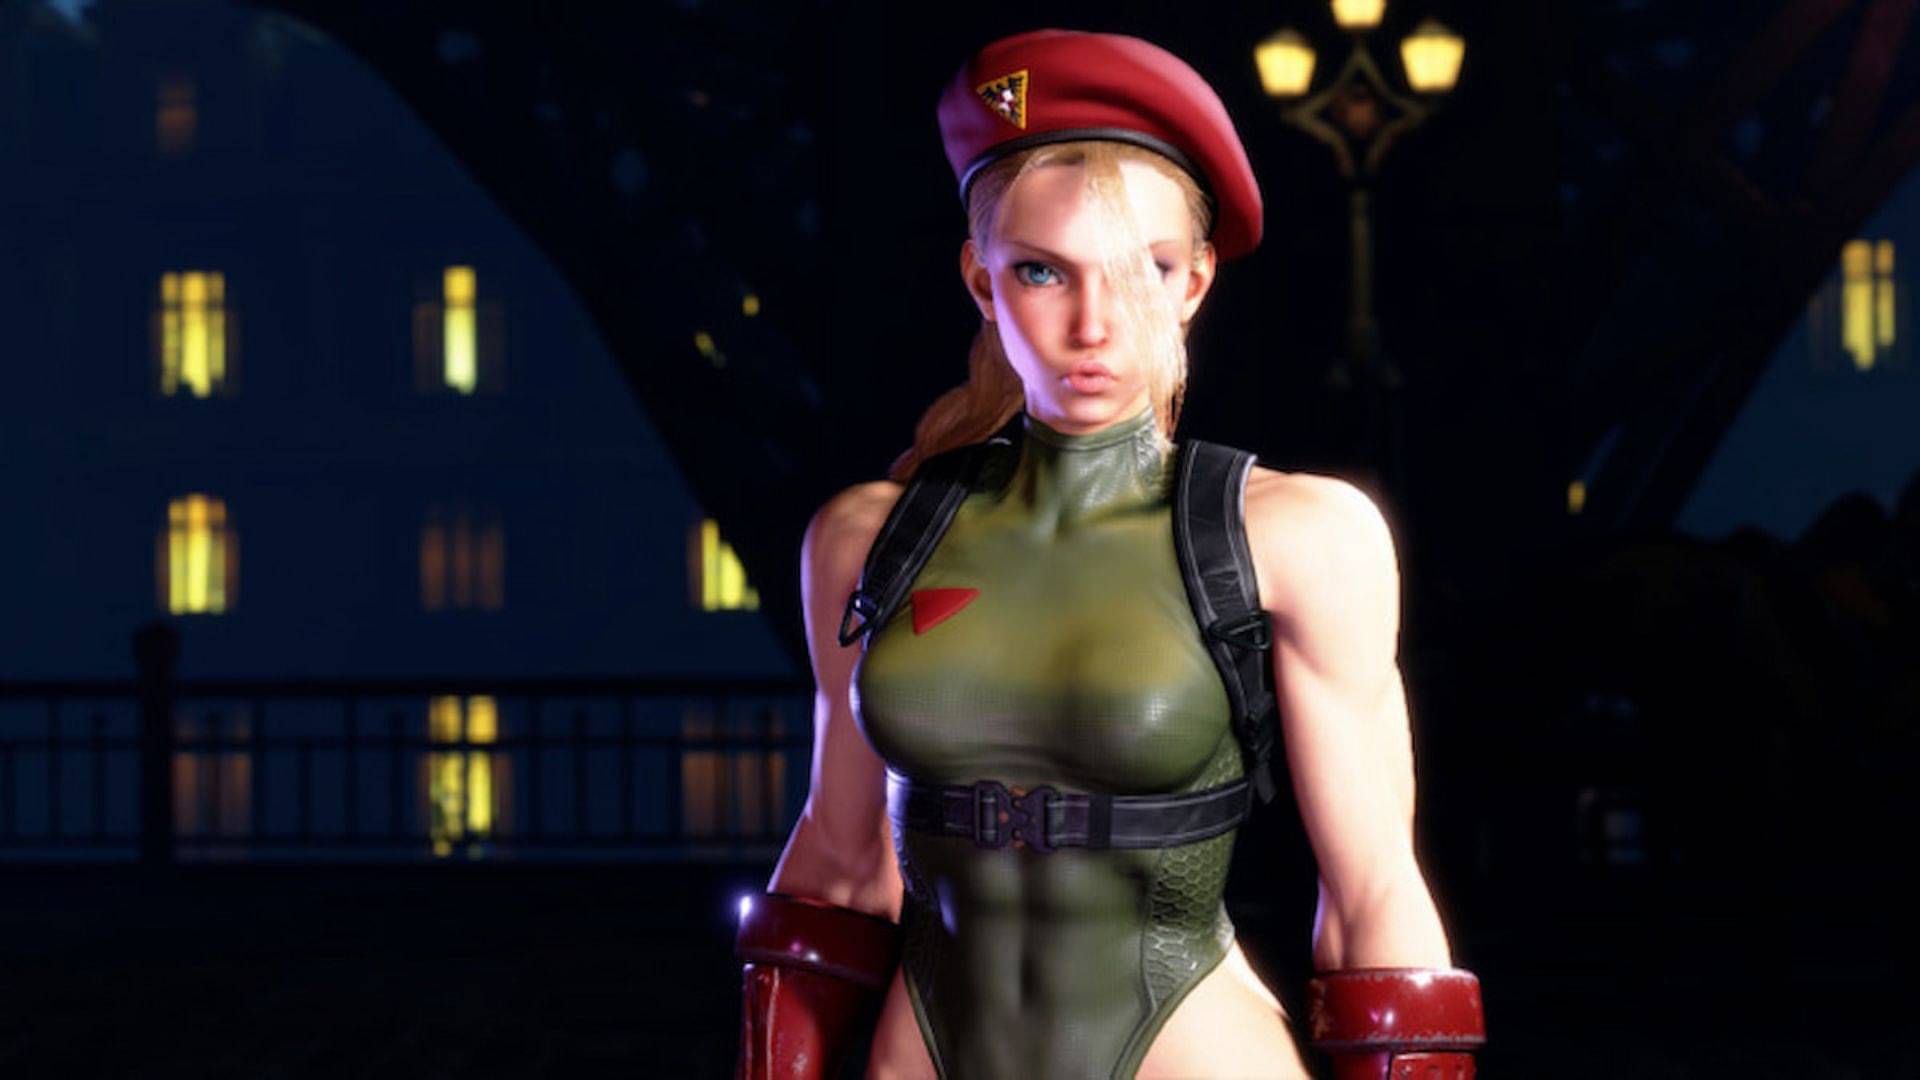 Marianne in Cammy's SF6 outfit, Cammy Stretch